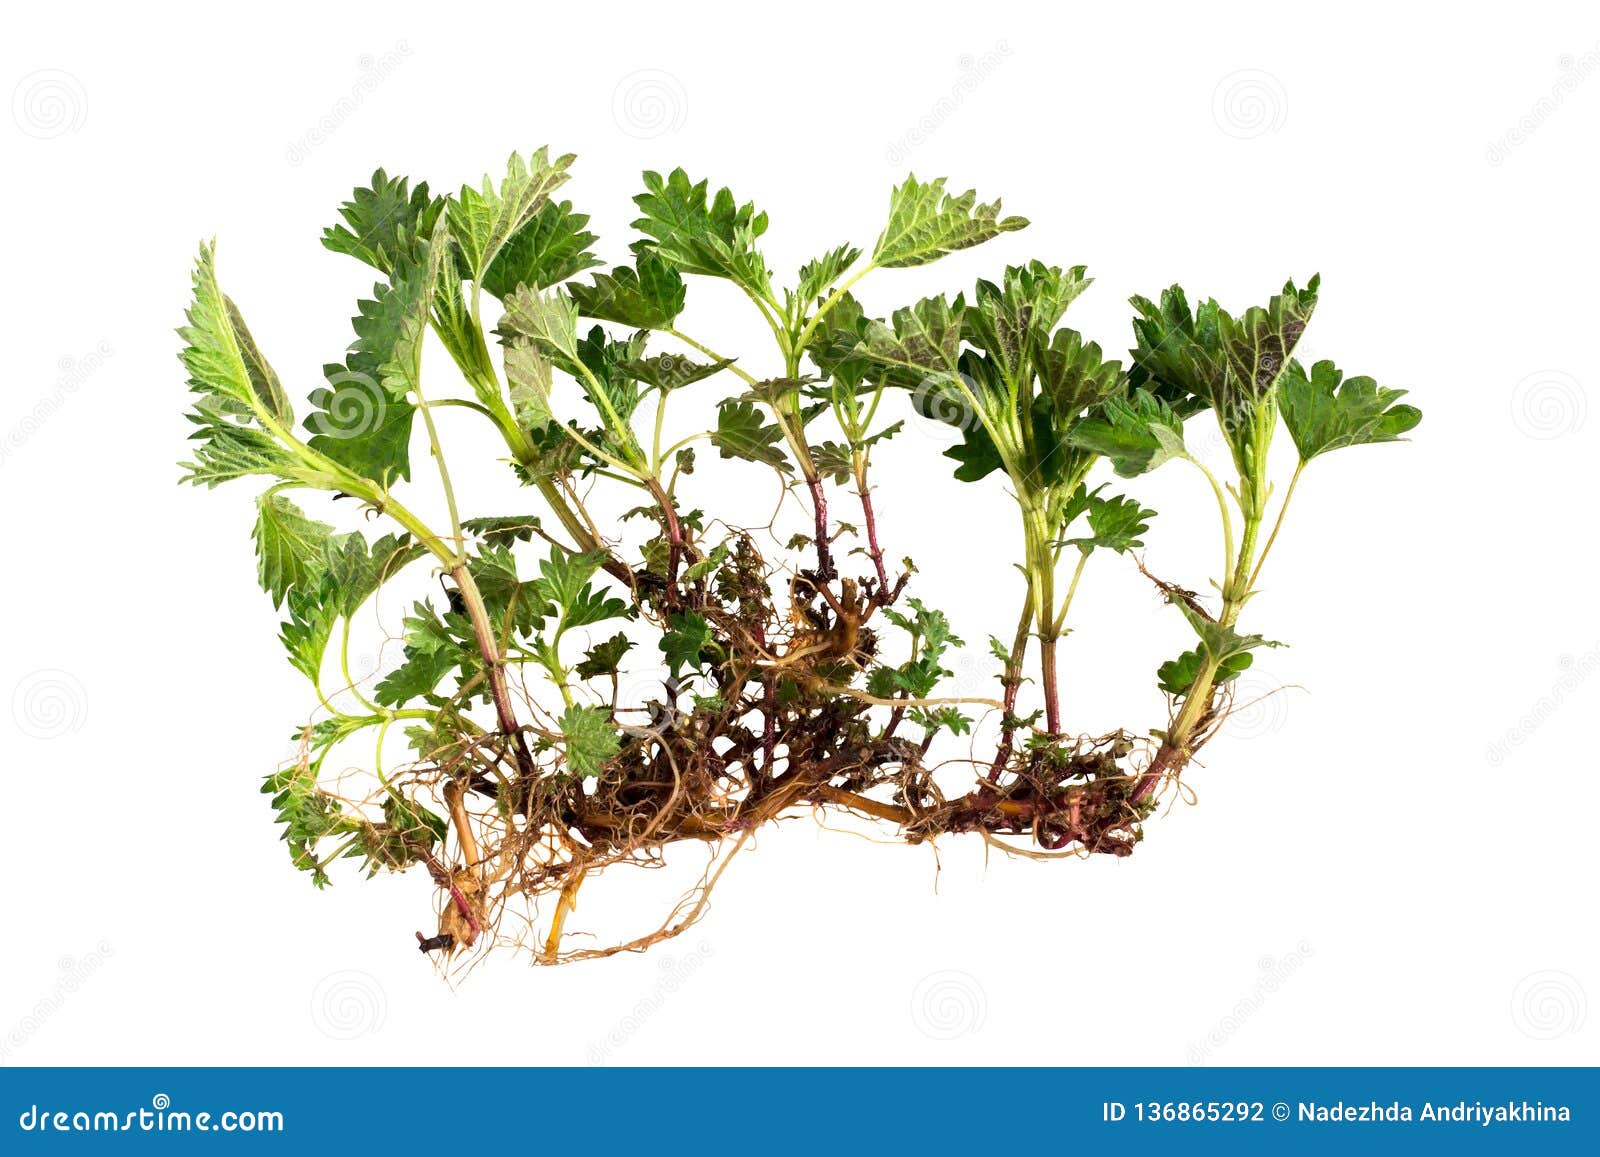 nettle with roots  on white